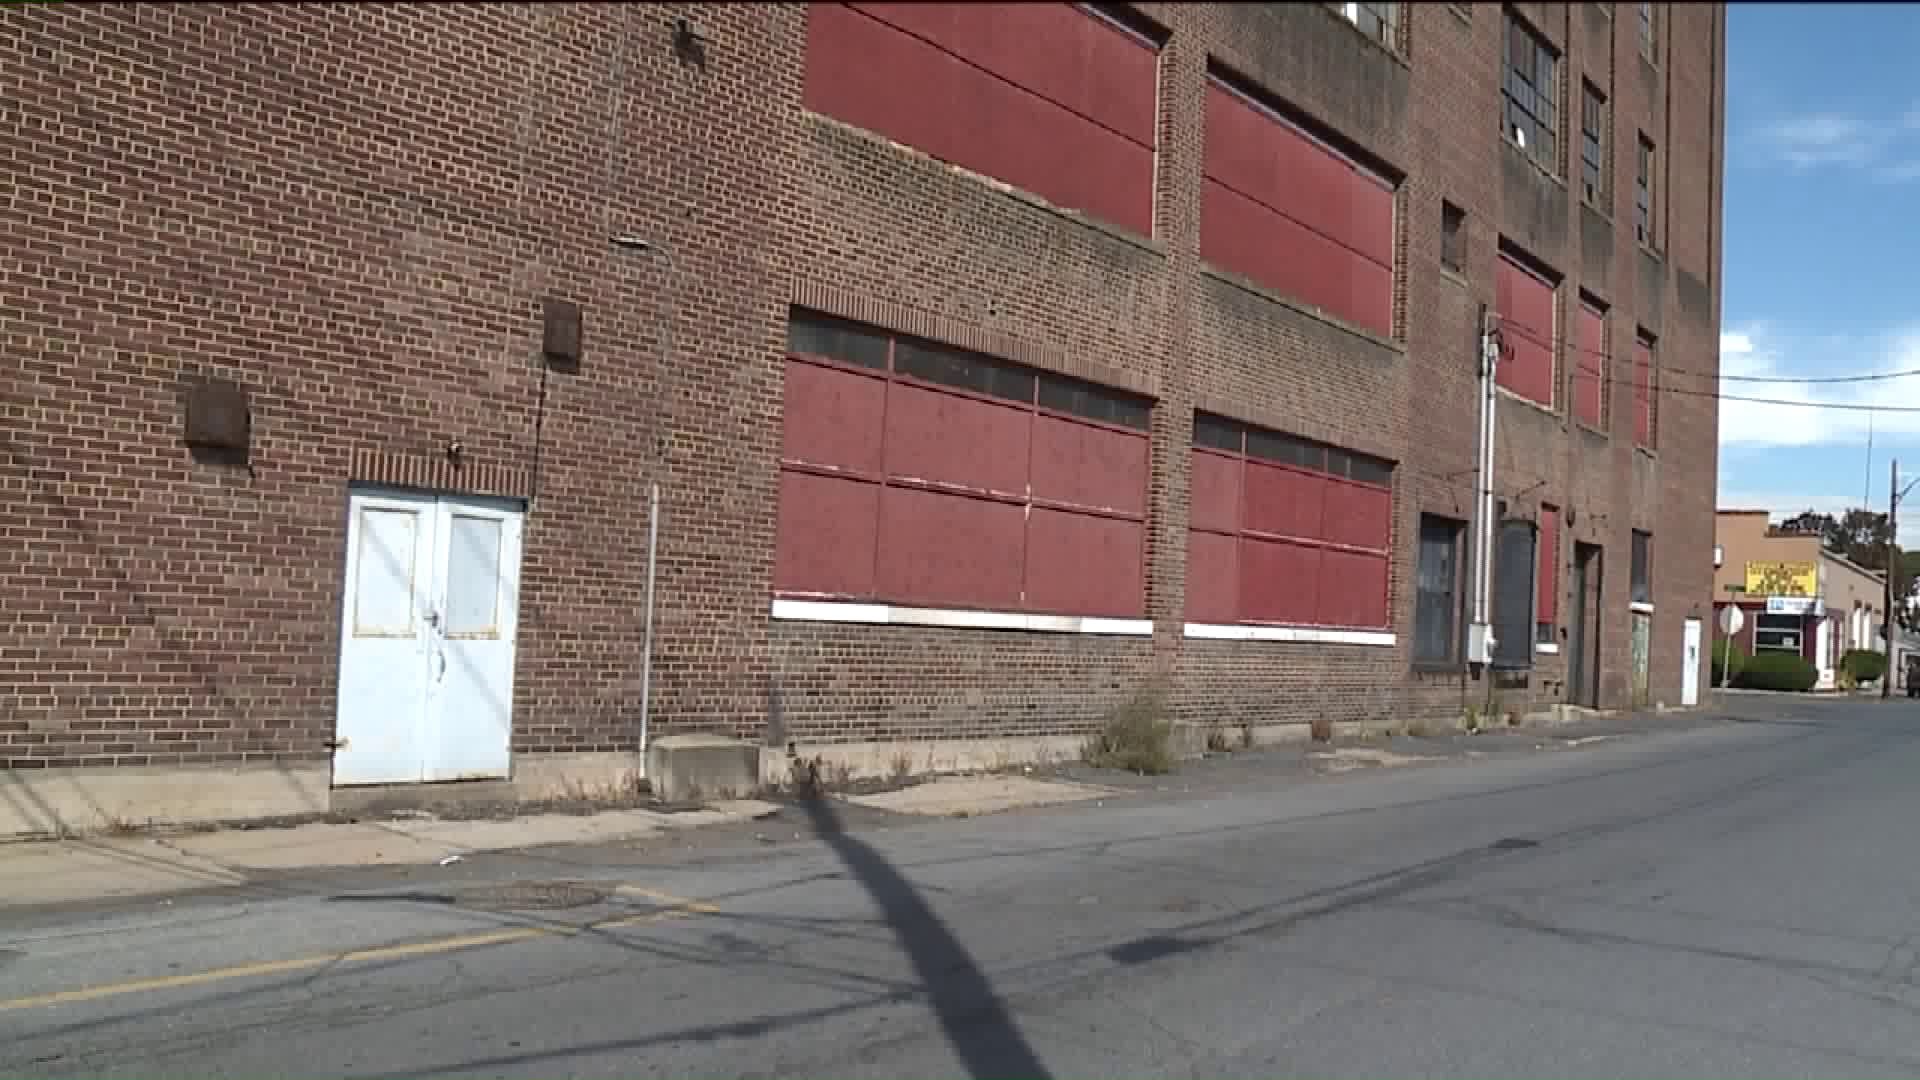 Developer Seeks to Convert Old Factory into Apartments